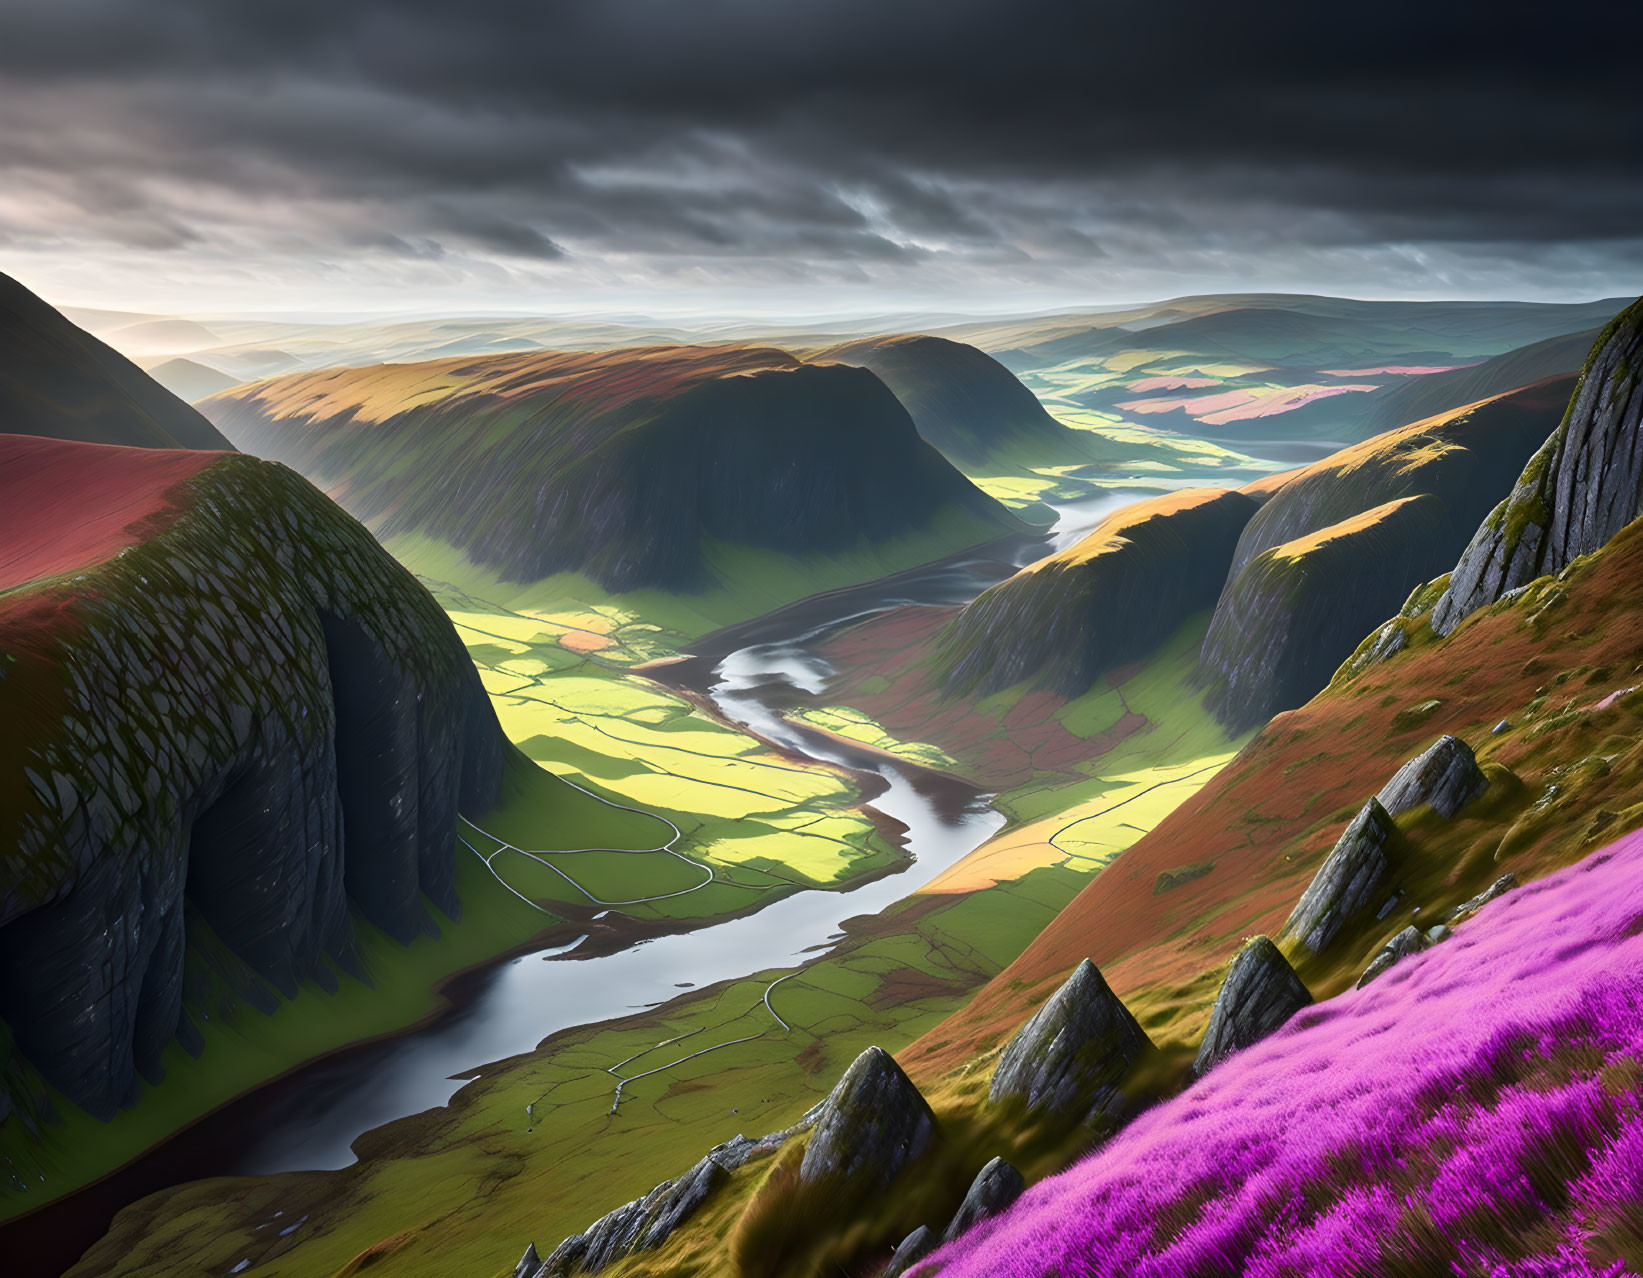 Scenic landscape with sunbeams, green valleys, hills, and purple flowers